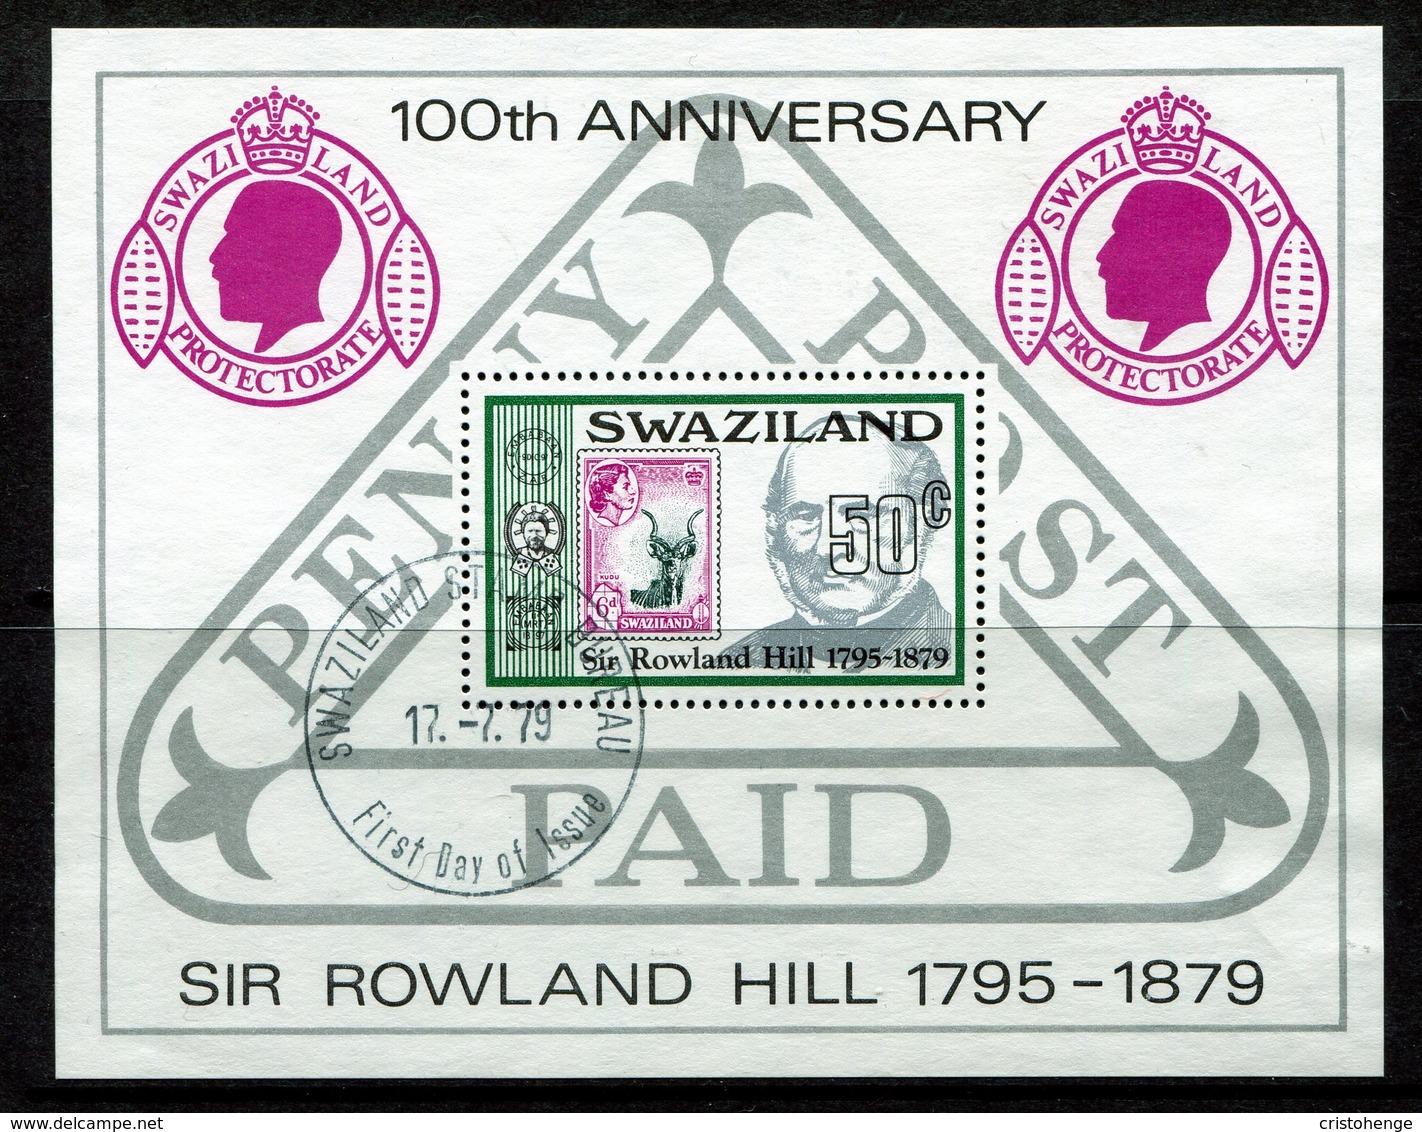 Swaziland 1979 Death Centenary Of Sir Rowland Hill Set MS (SG MS326) - Swaziland (1968-...)